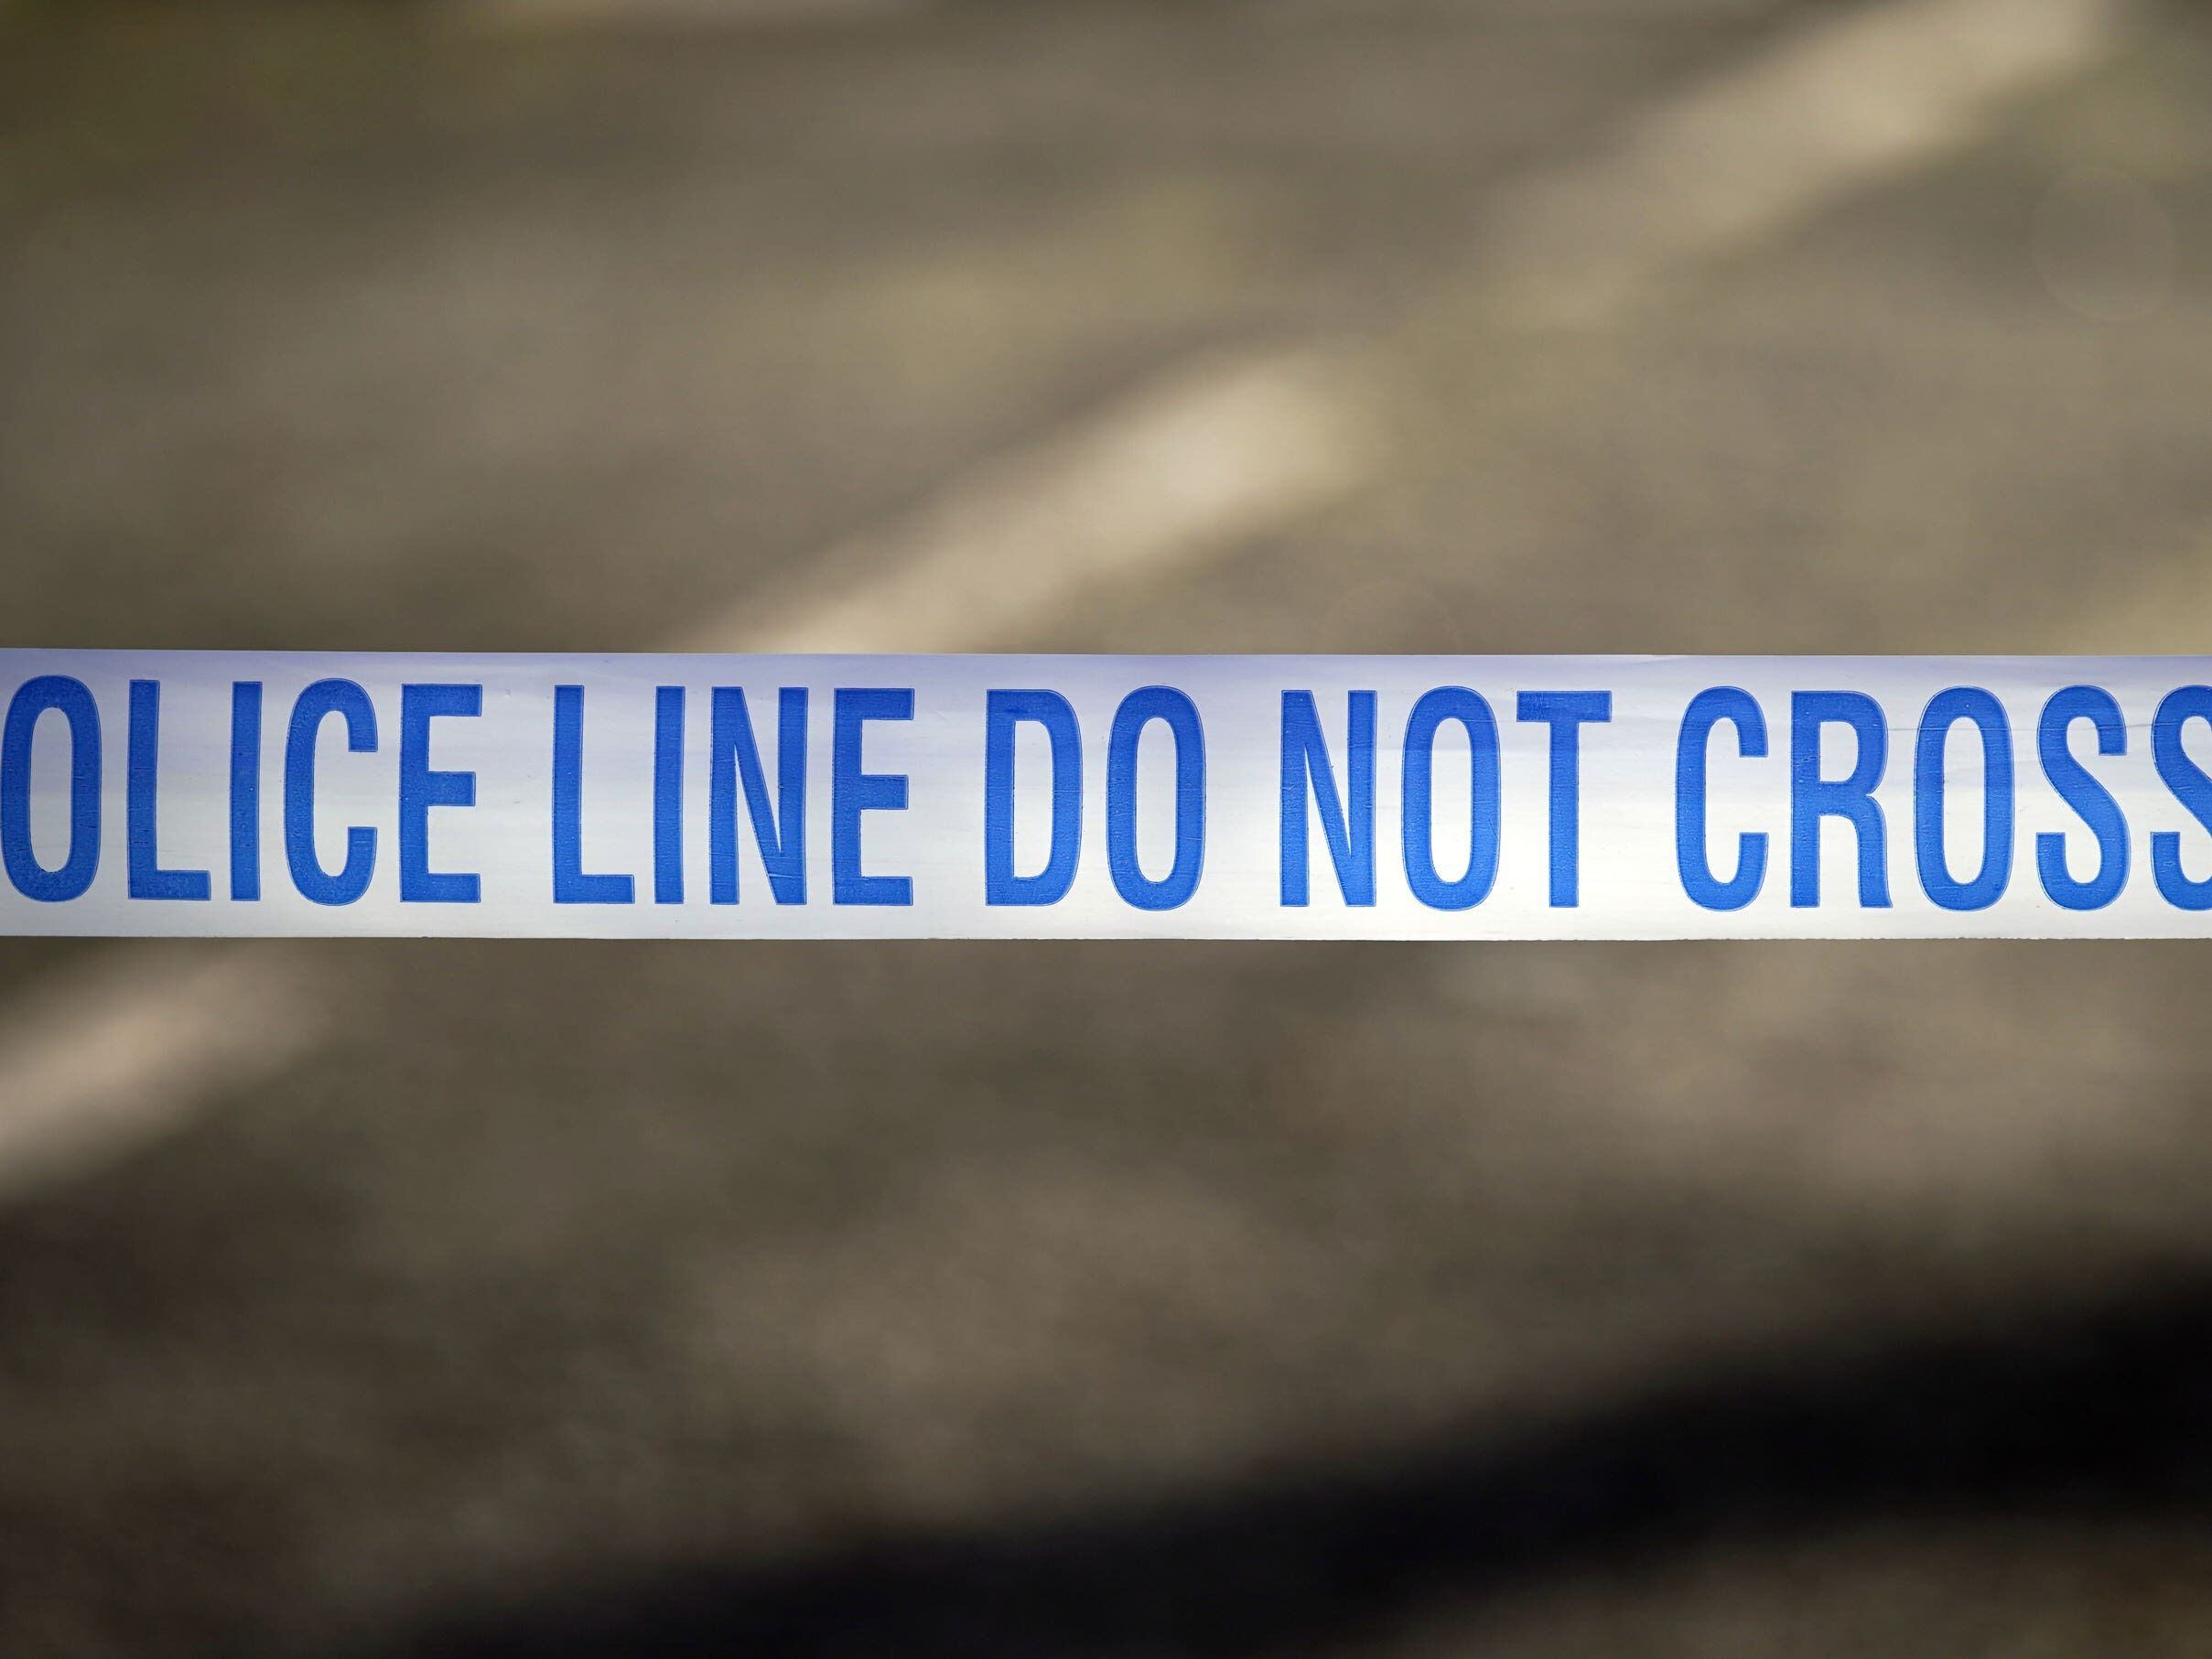 Man and woman found dead in Stoke-on-Trent